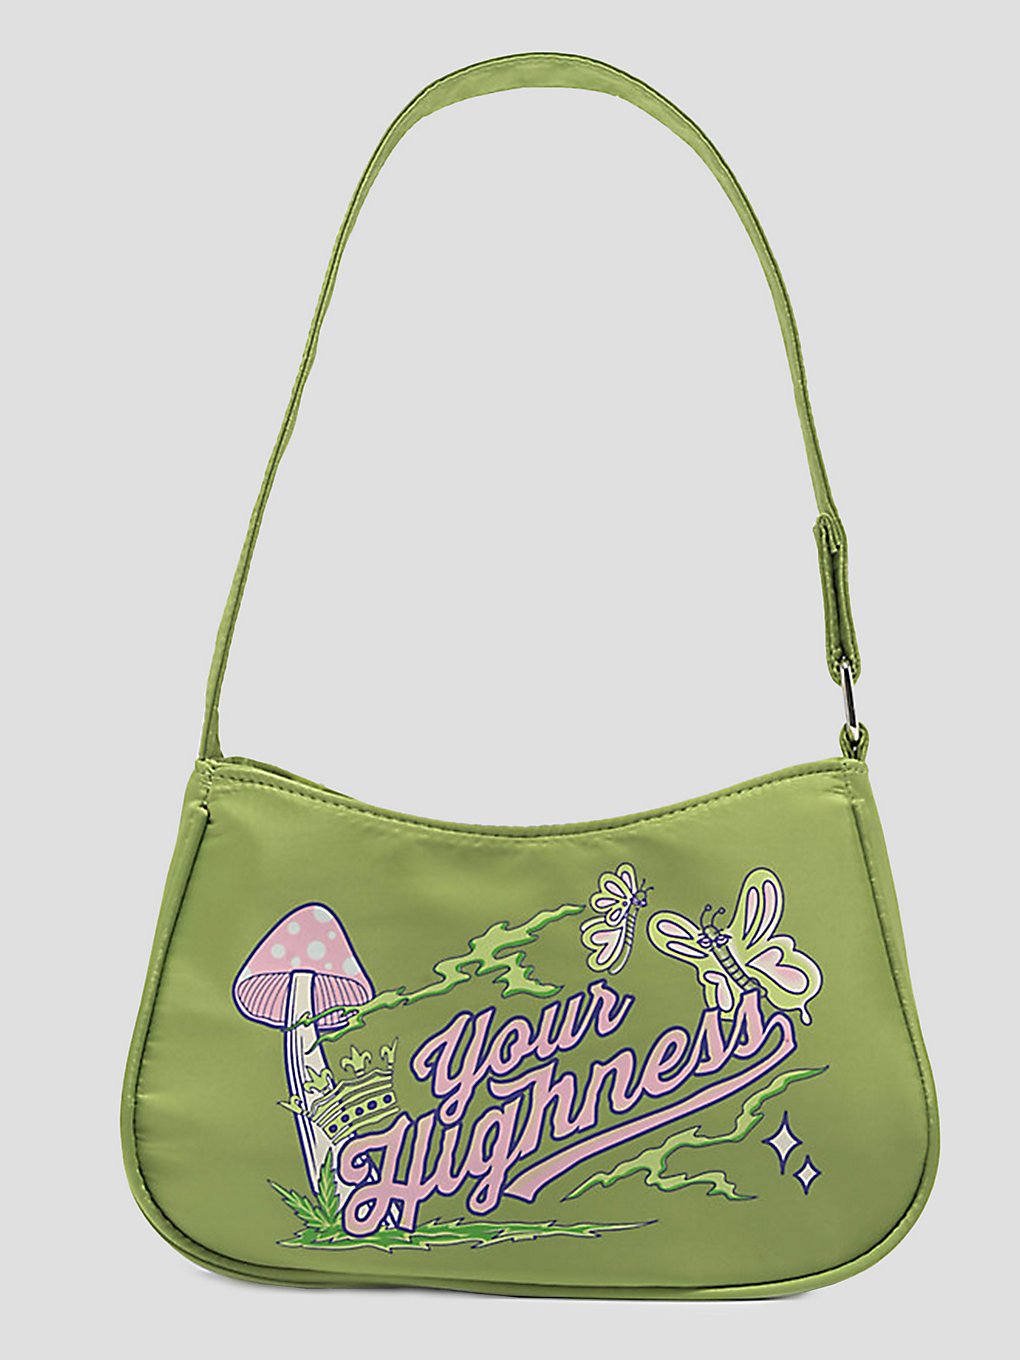 Your Highness Could Be Worse Bag green kaufen